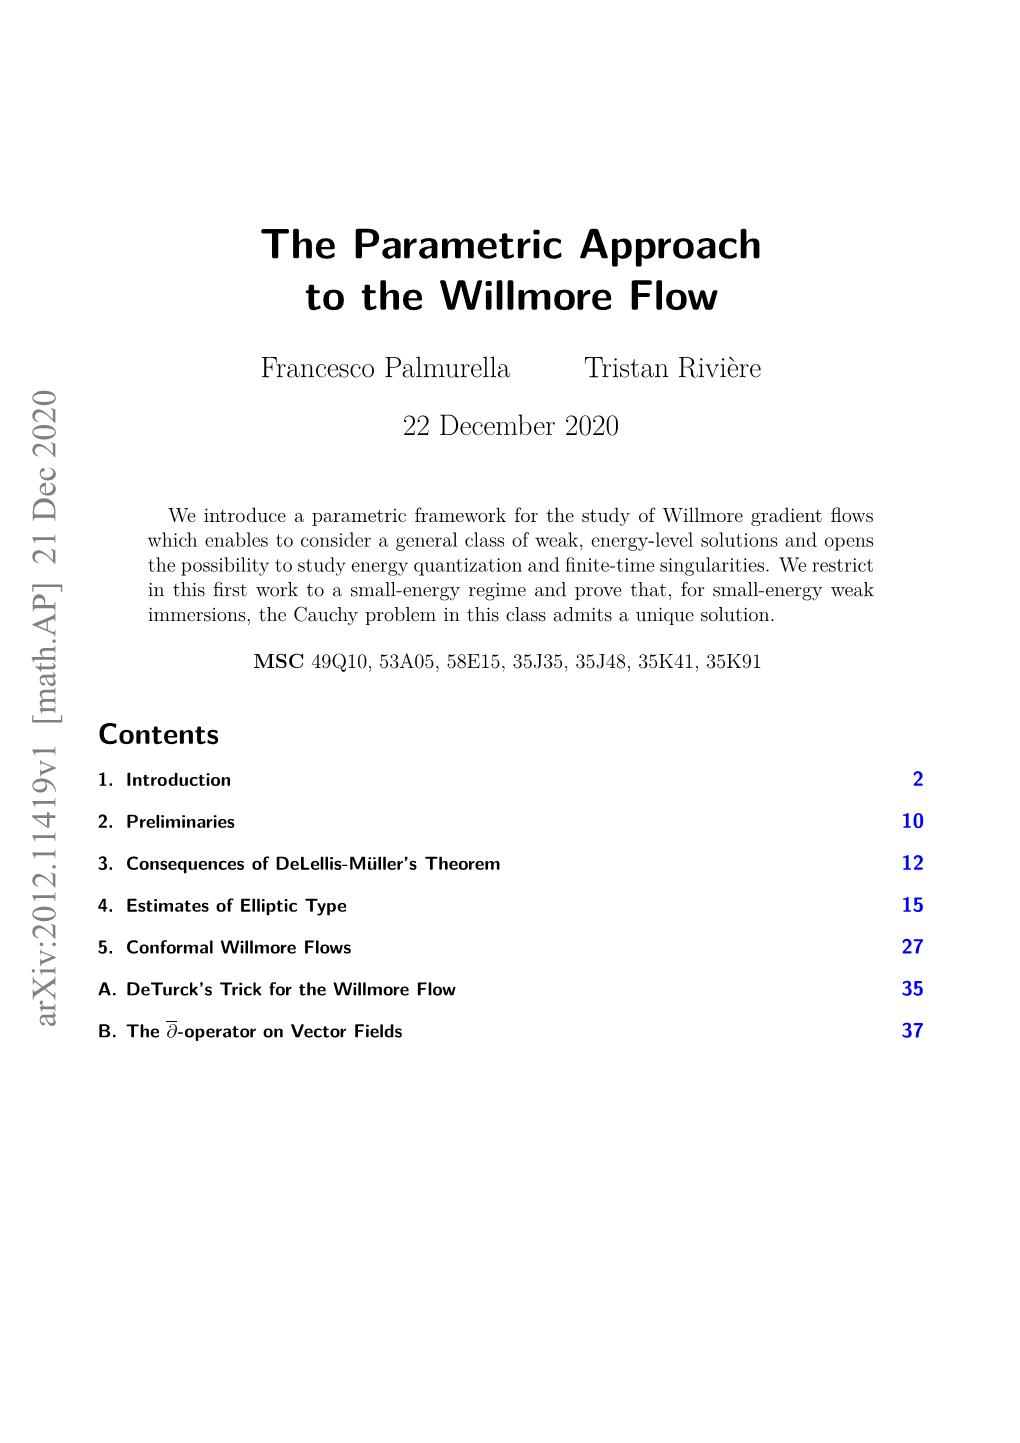 The Parametric Approach to the Willmore Flow